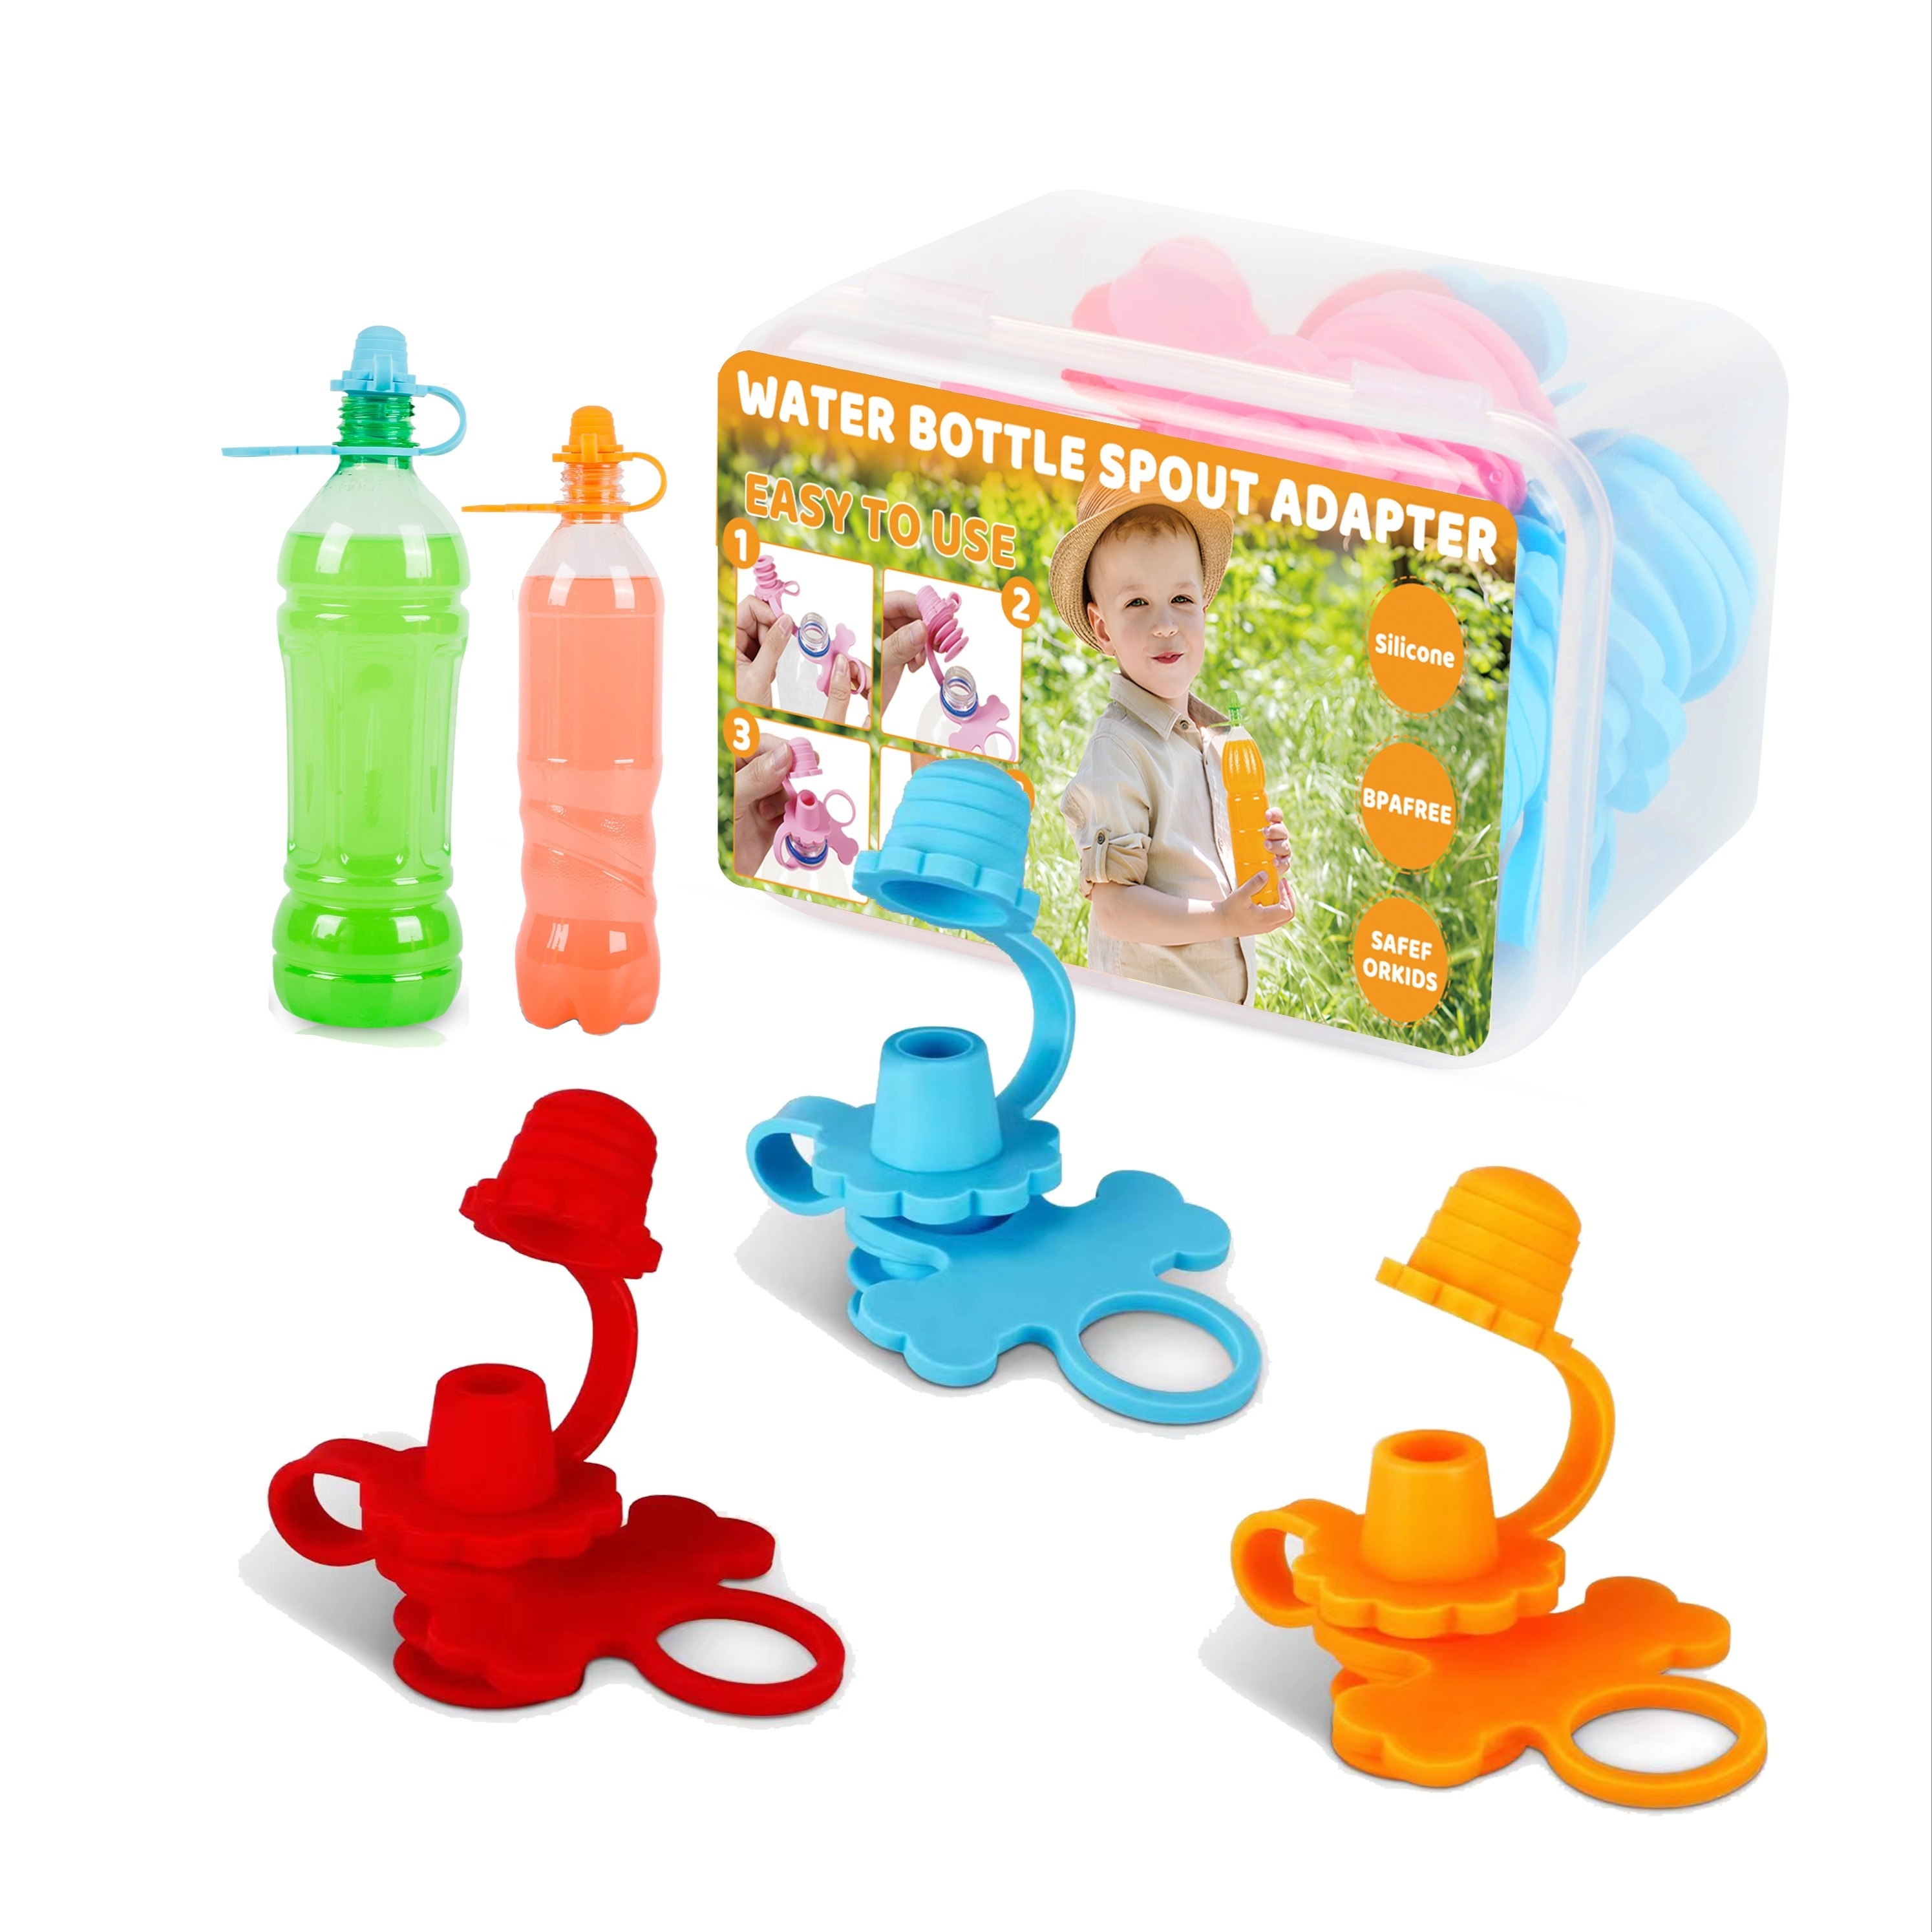 Leakproof Double Handle Silicone Baby Water Bottle